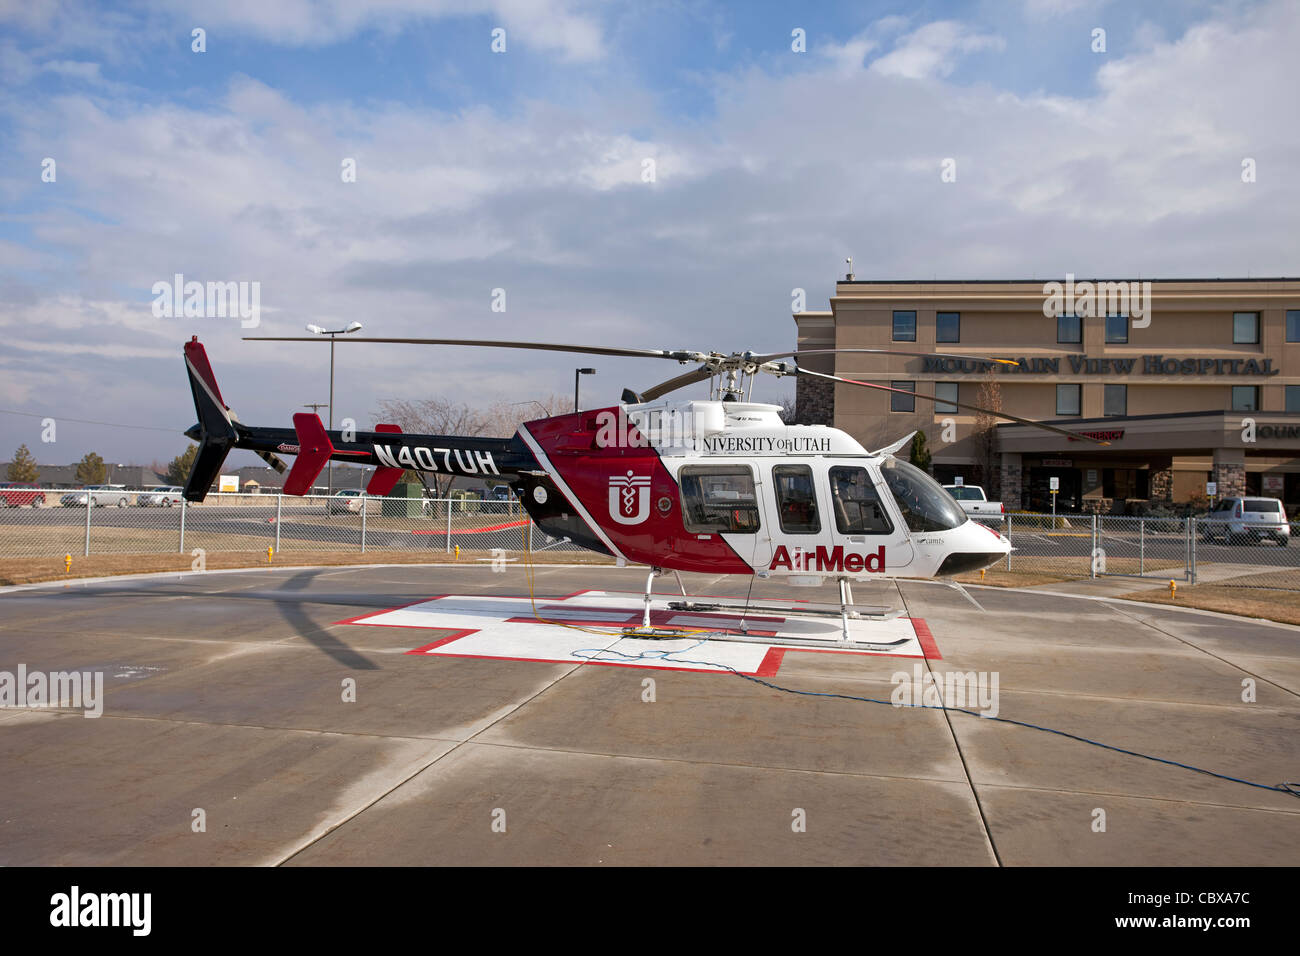 Helicopter AirMed from University of Utah Medical Center ready for emergency flight in front of hospital. Stock Photo